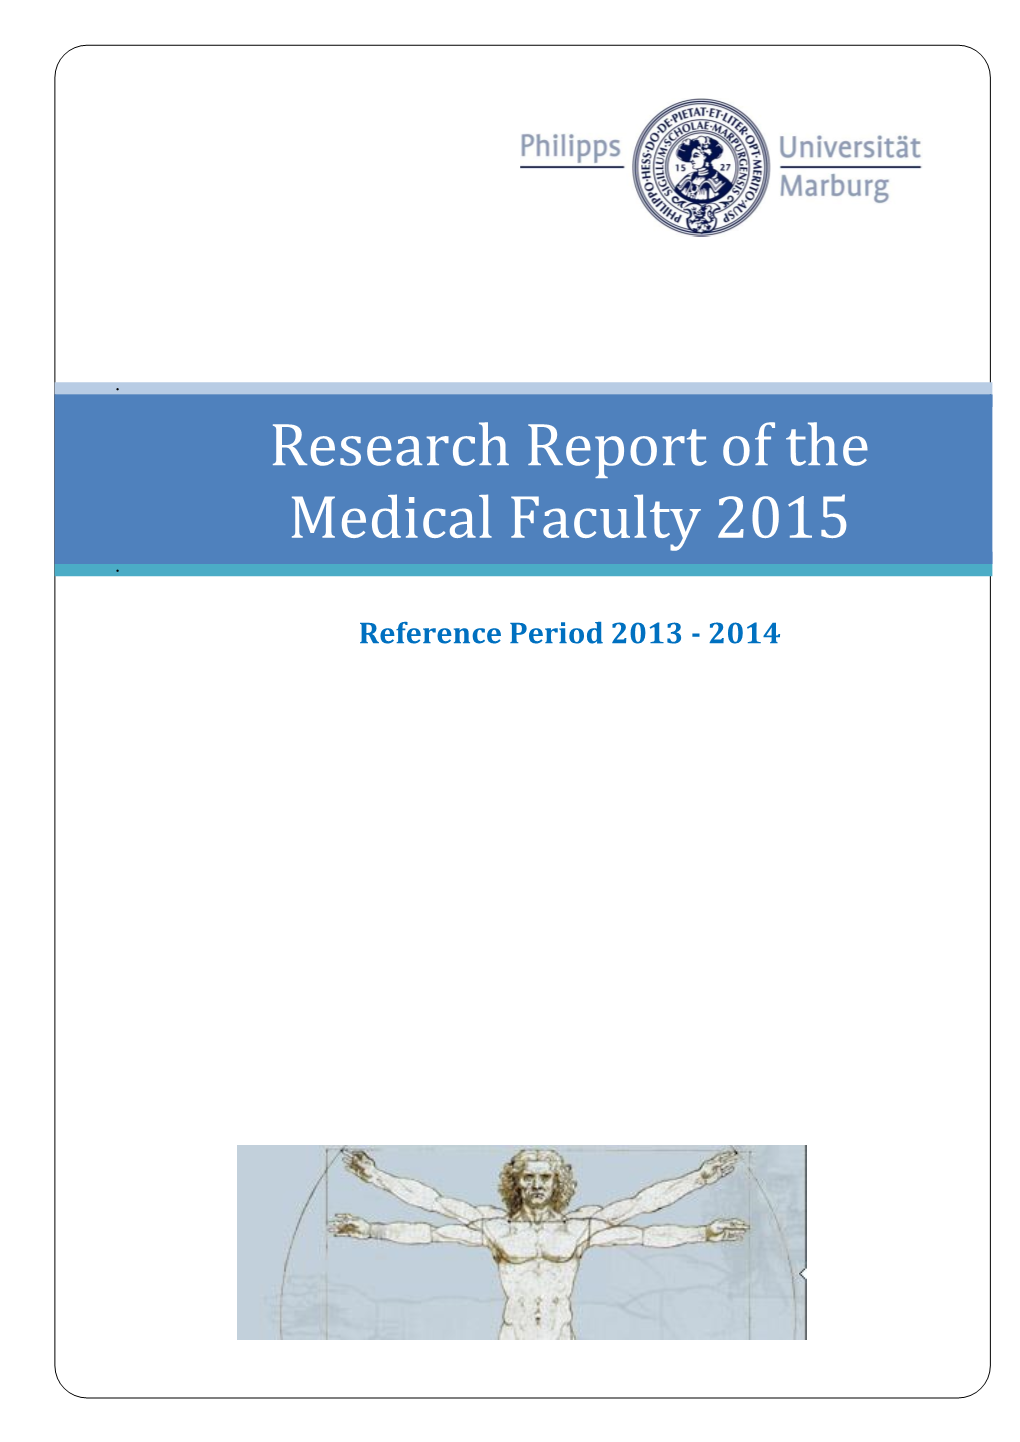 Research Report of the Medical Faculty 2015